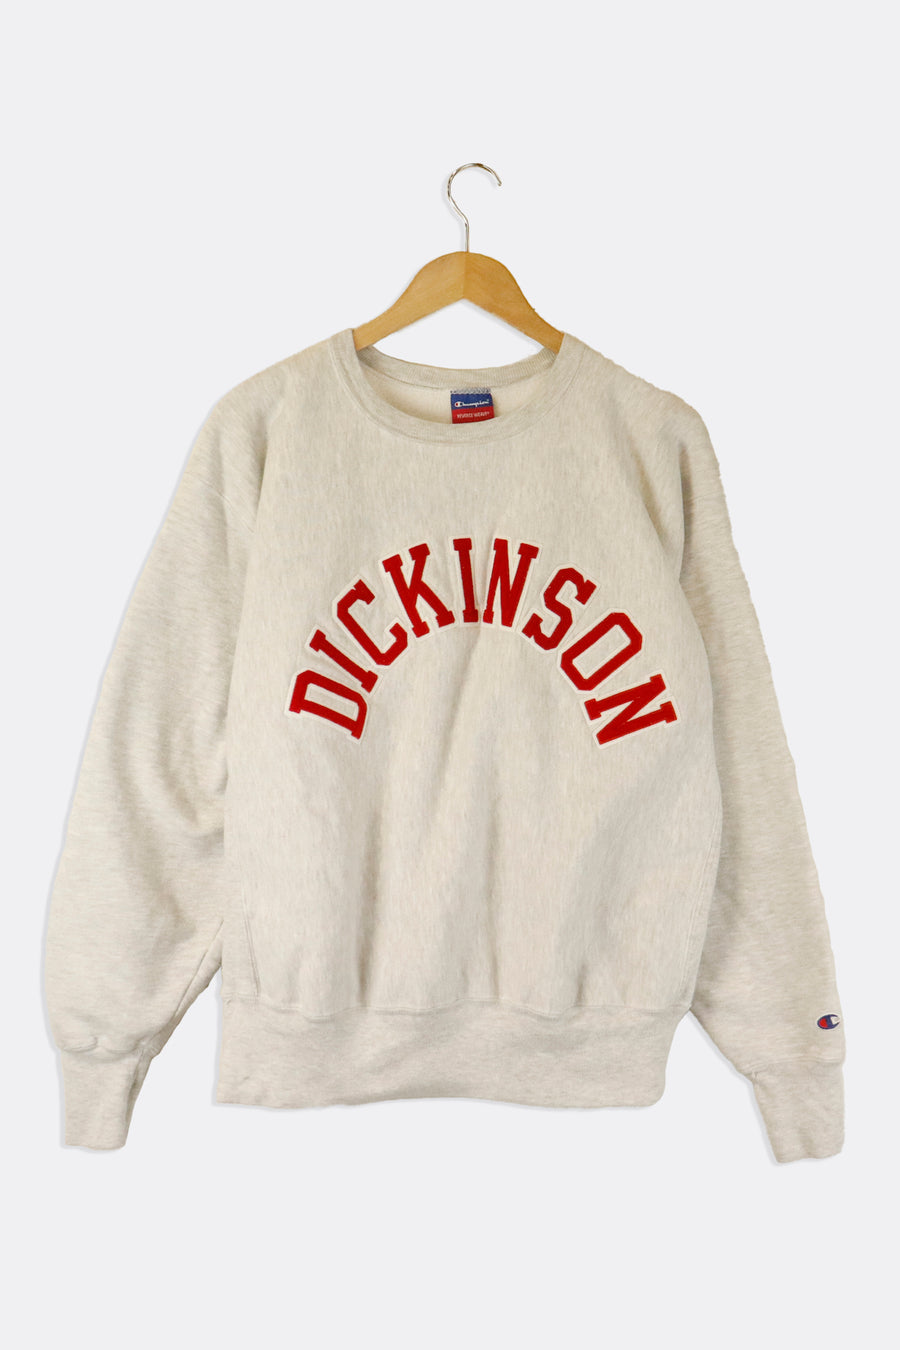 Vintage Varsity Dickinson Embroided Puffy Soft Large Red Font Outlined In White Sweatshirt Sz L